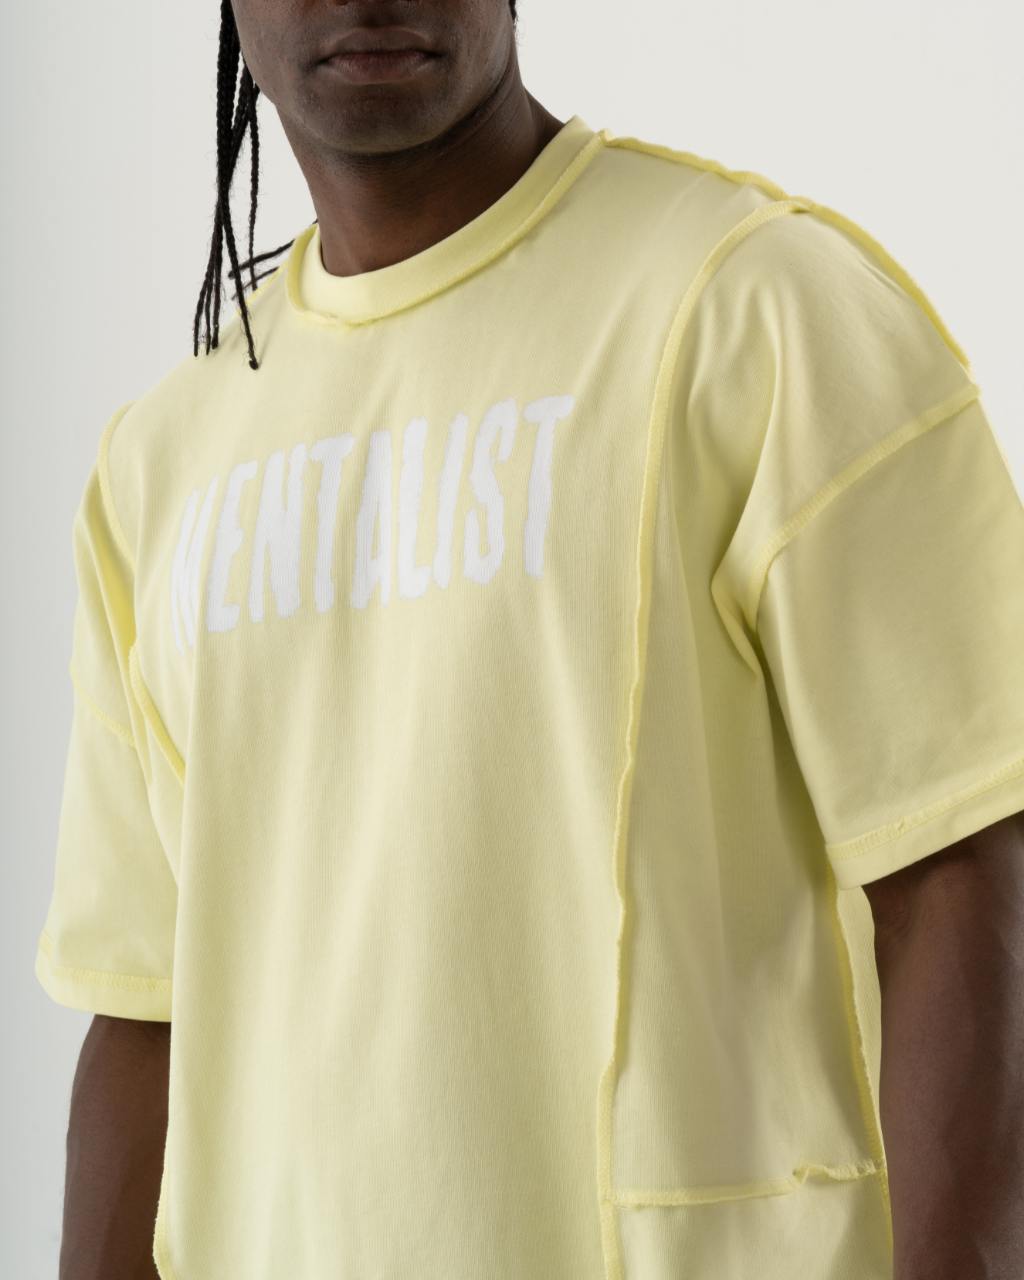 A casual man wearing a summery yellow MENTALIST T-SHIRT | LIME with the word mentalist on it.